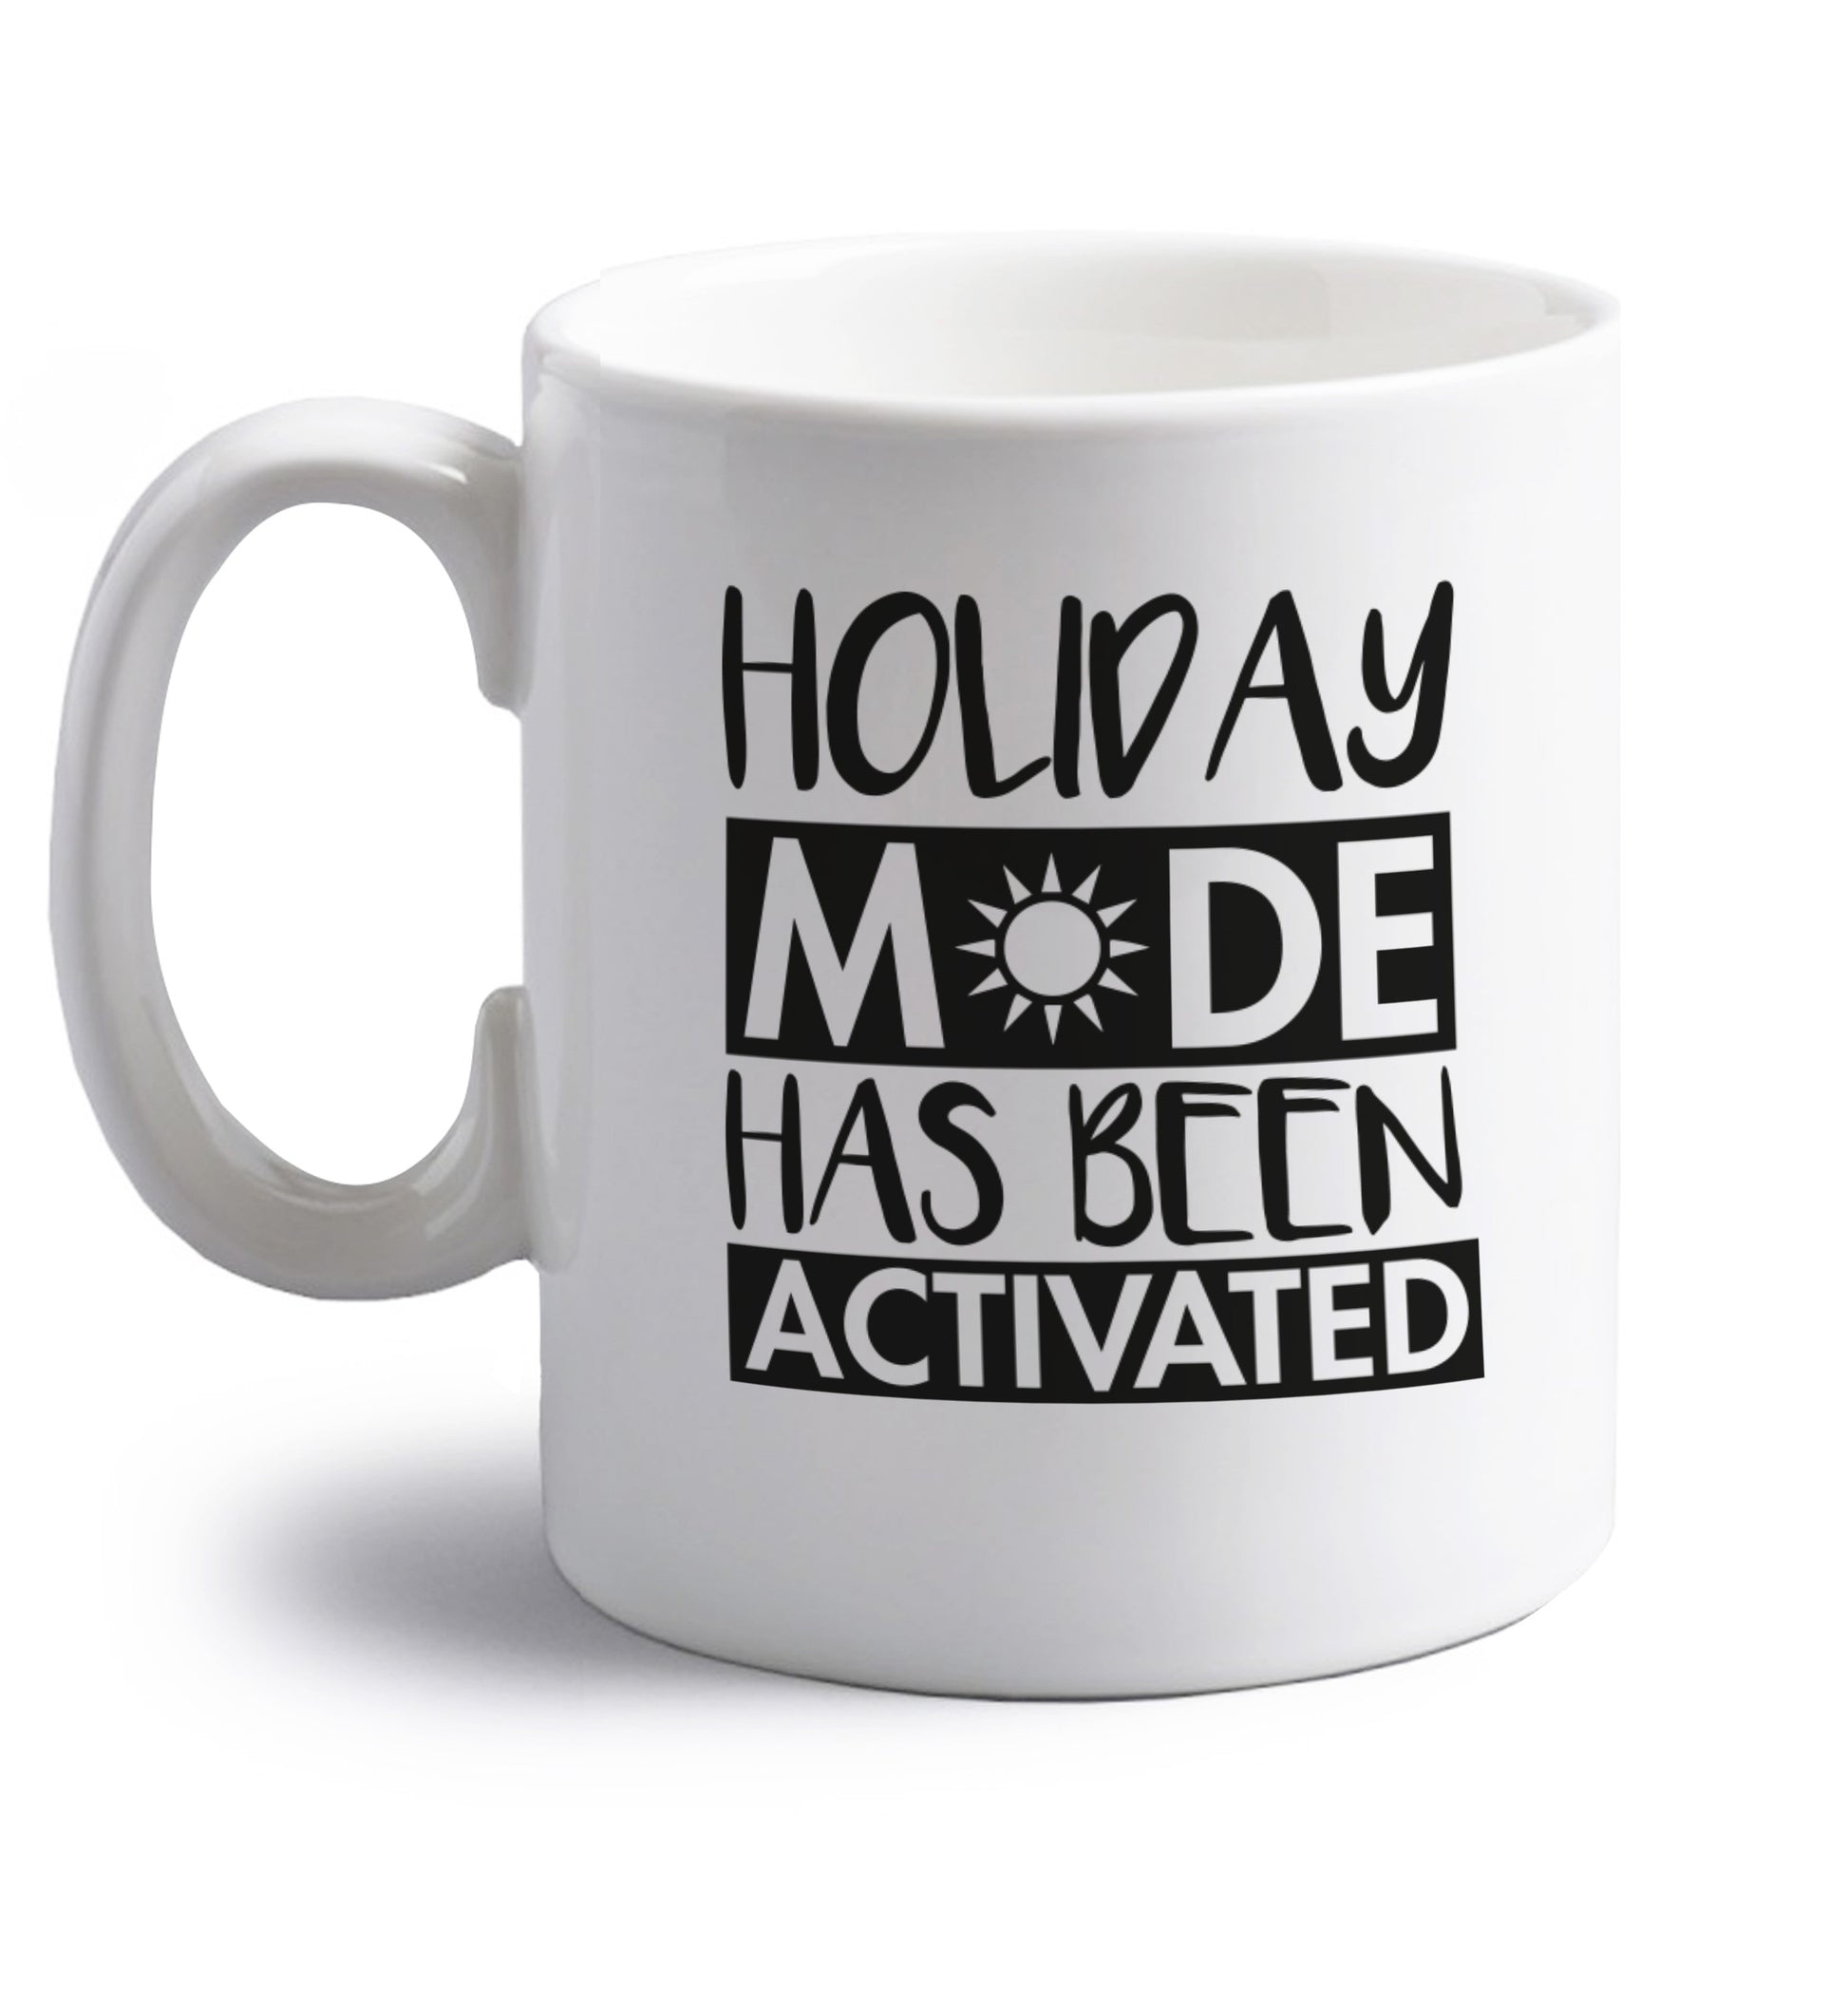 Holiday mode has been activated right handed white ceramic mug 